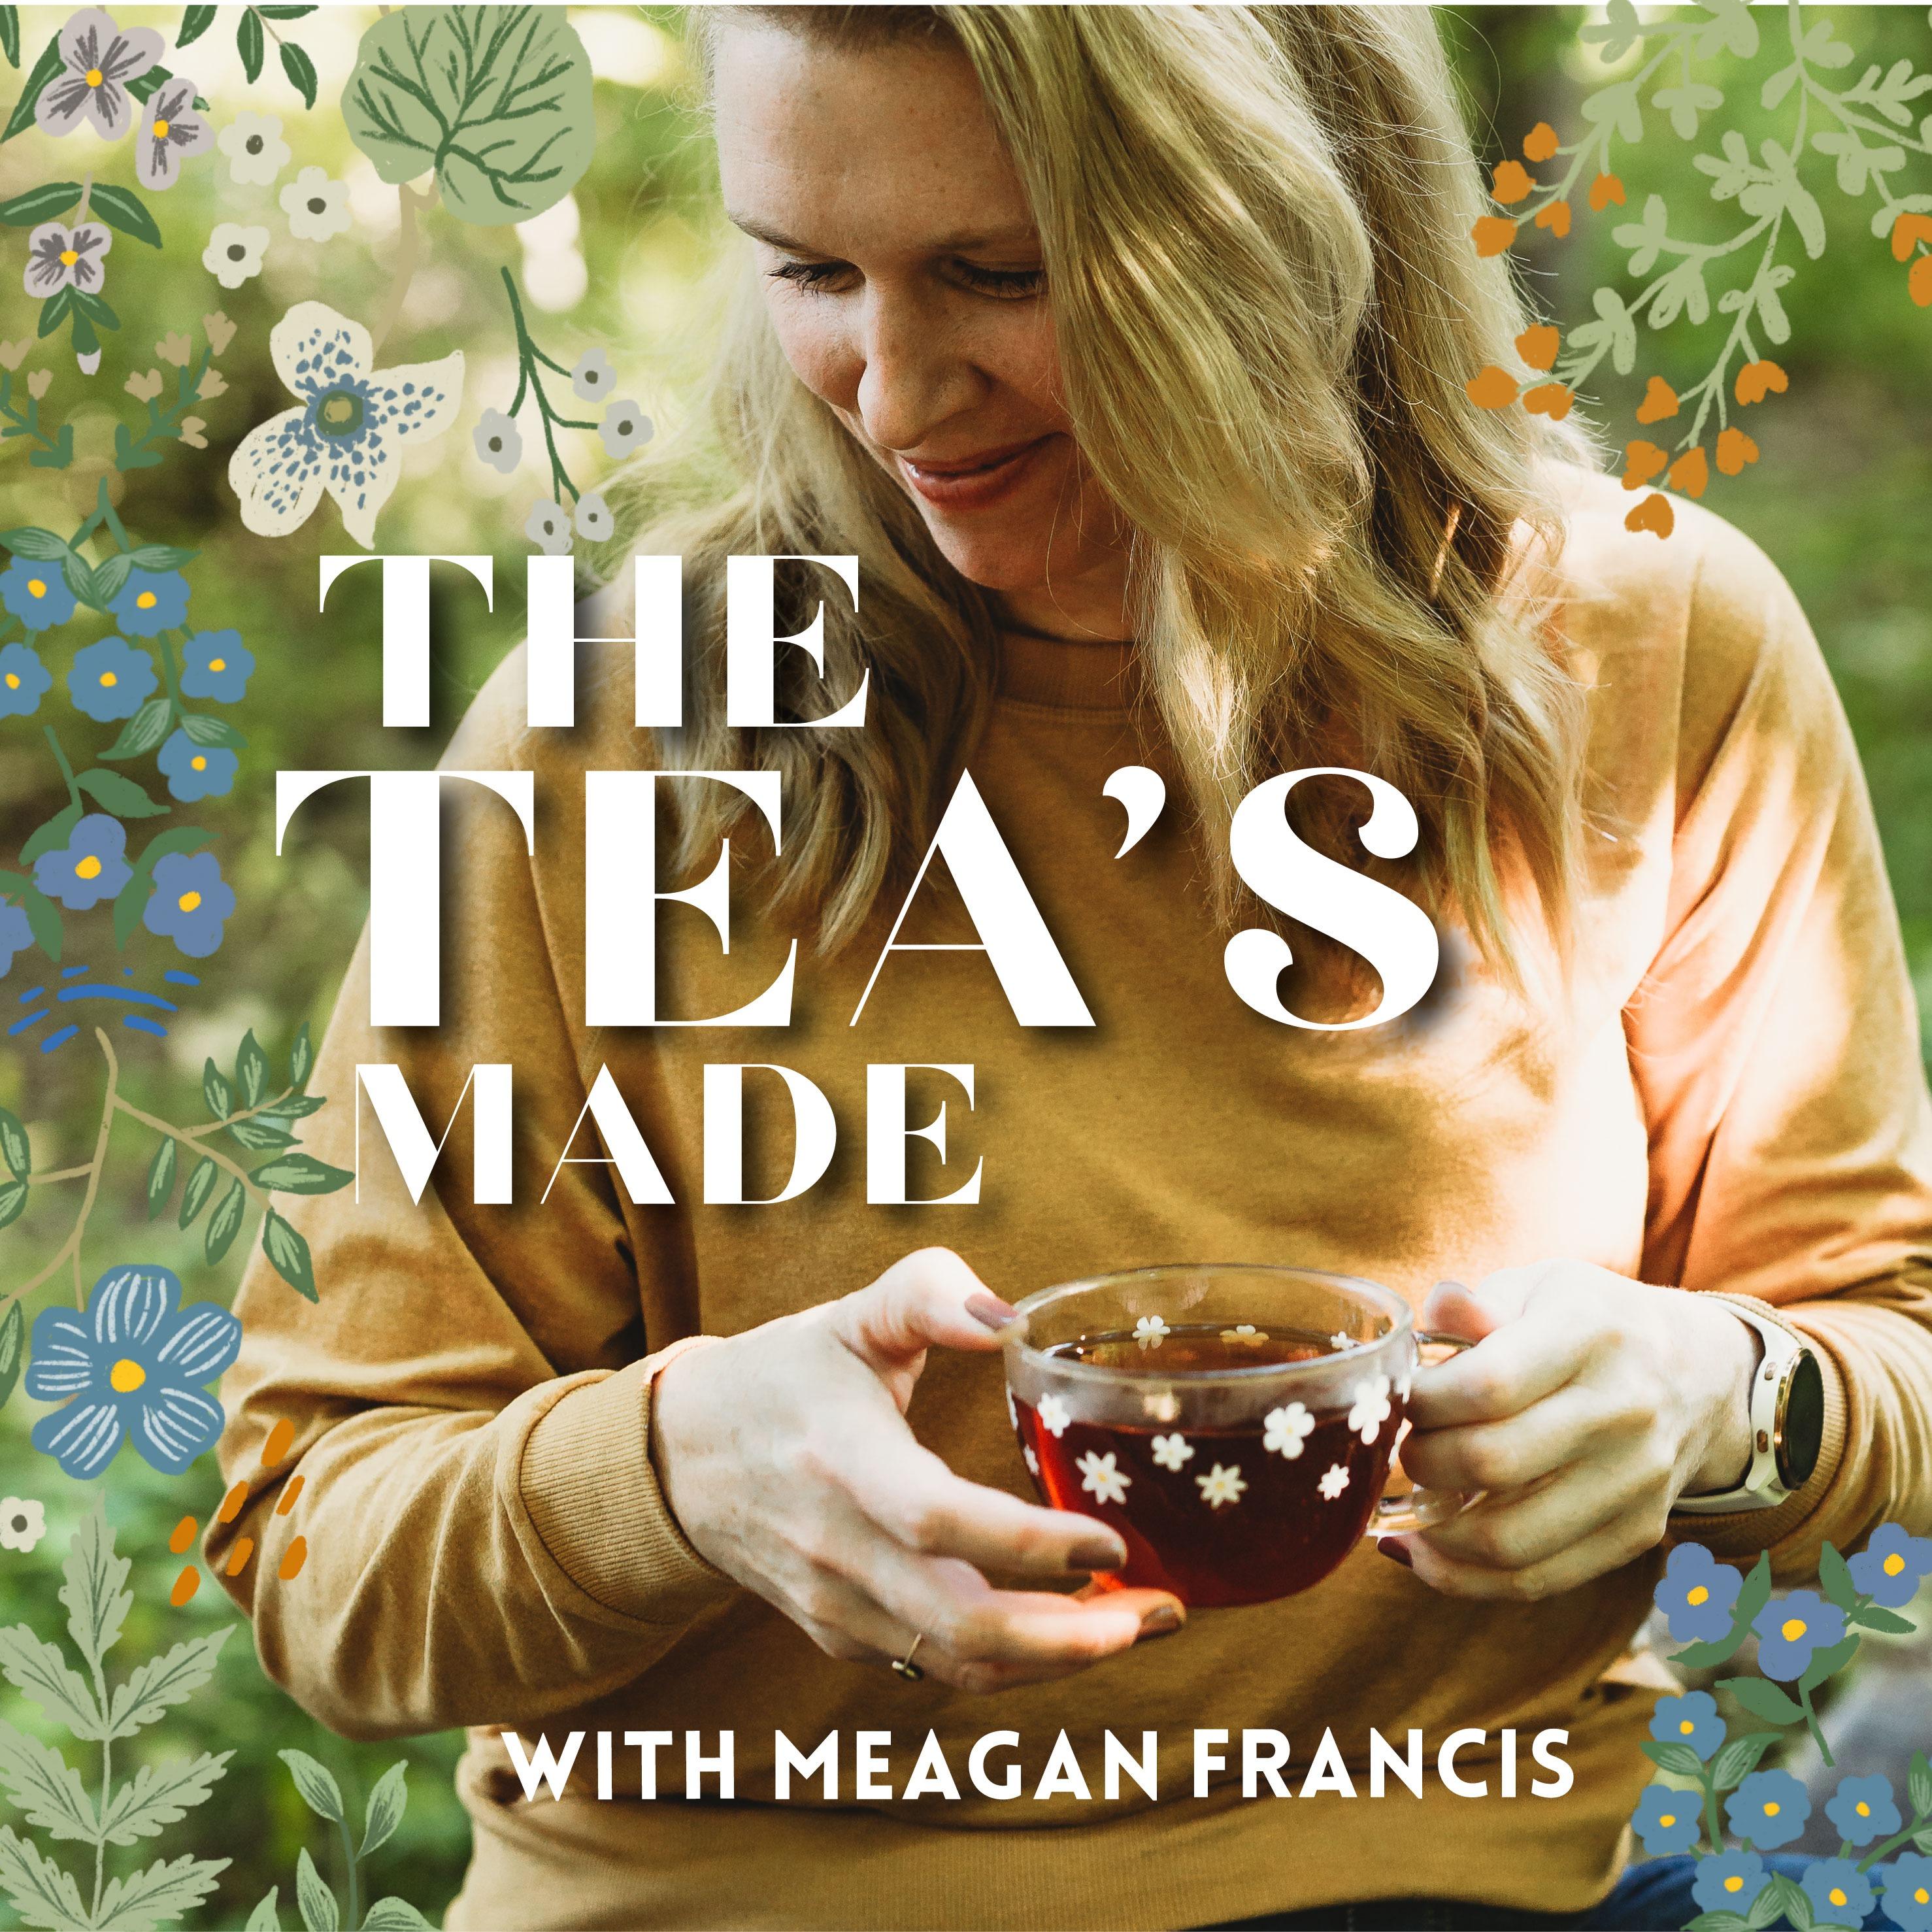 The Tea's Made with Meagan Francis